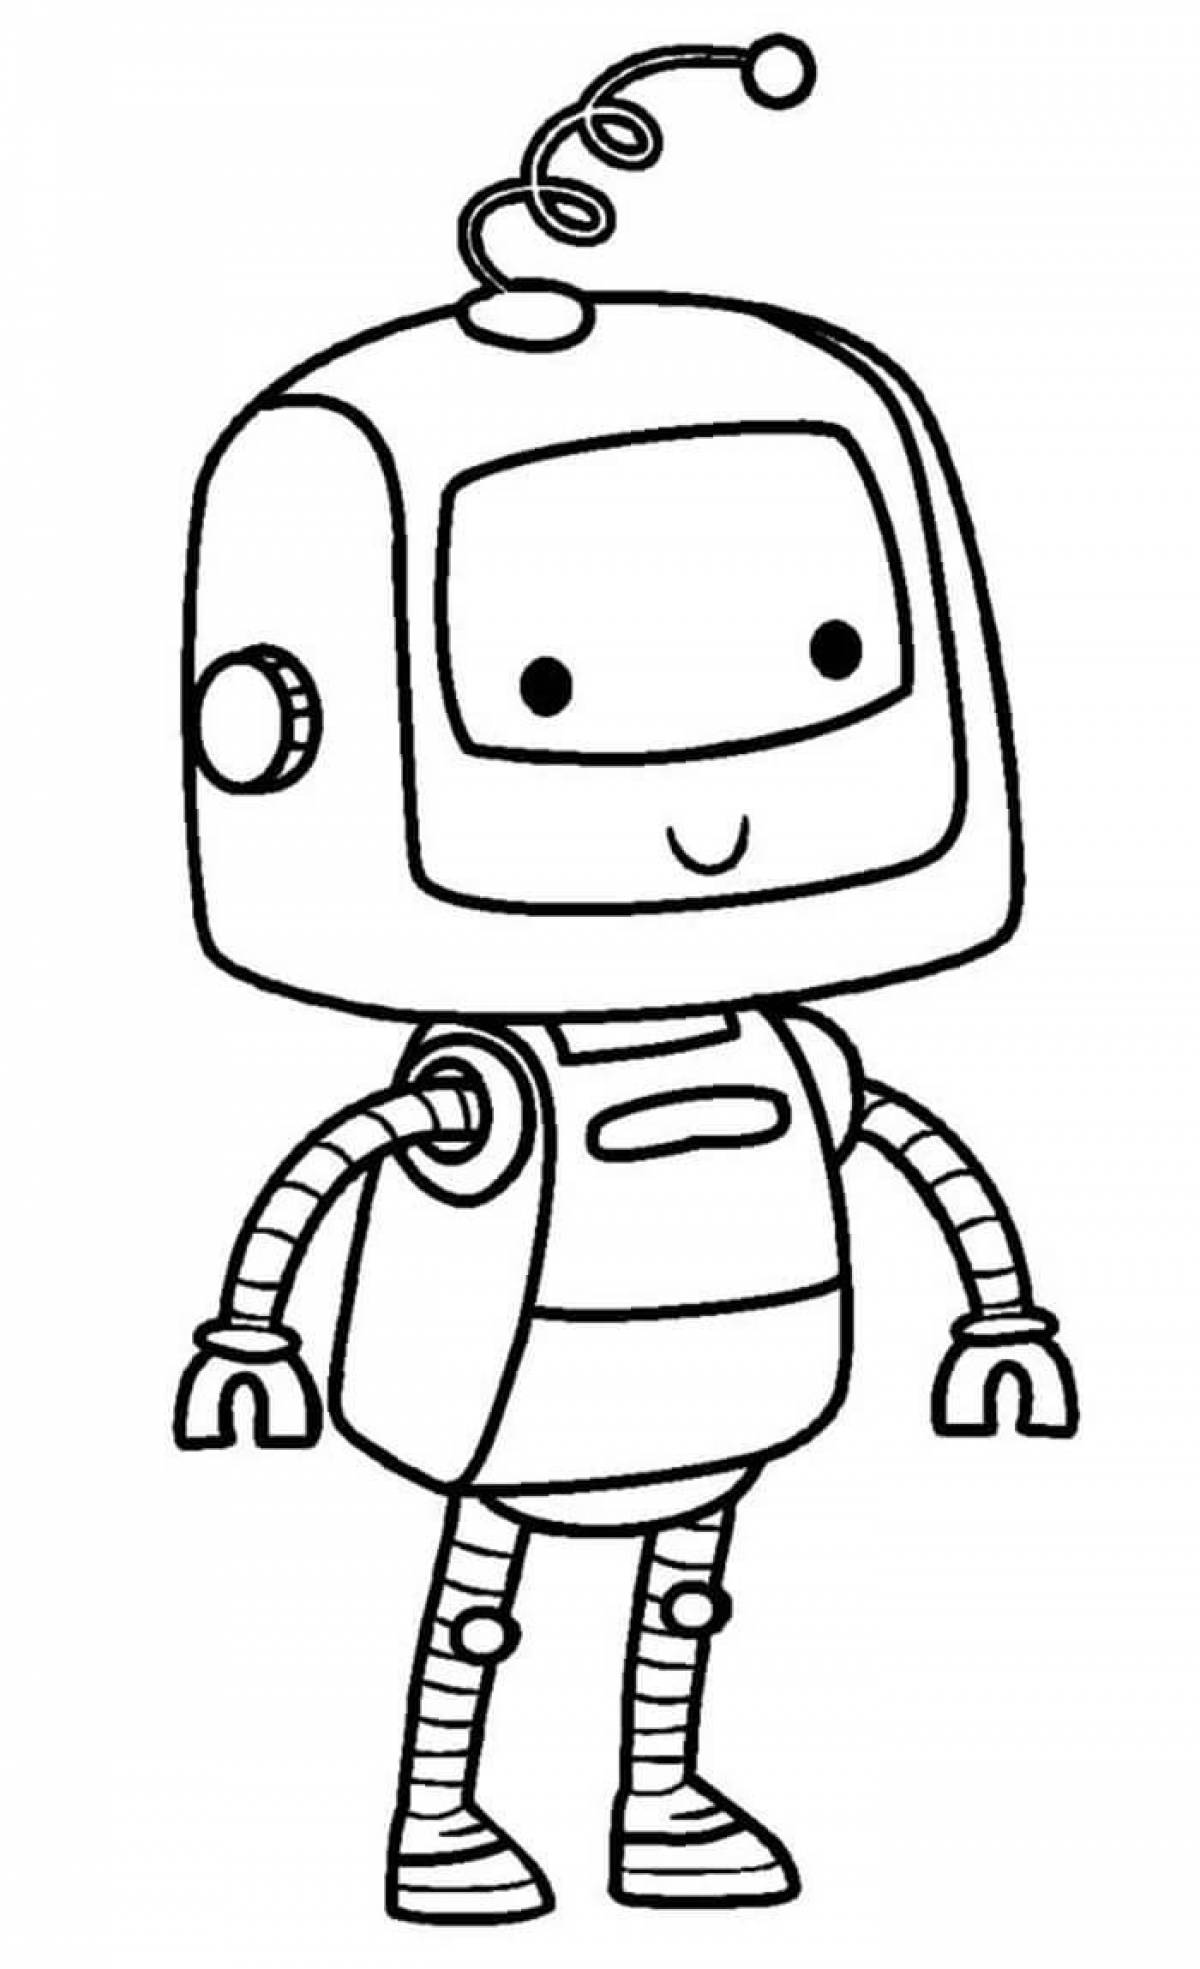 Joyful robot coloring book for 3-4 year olds